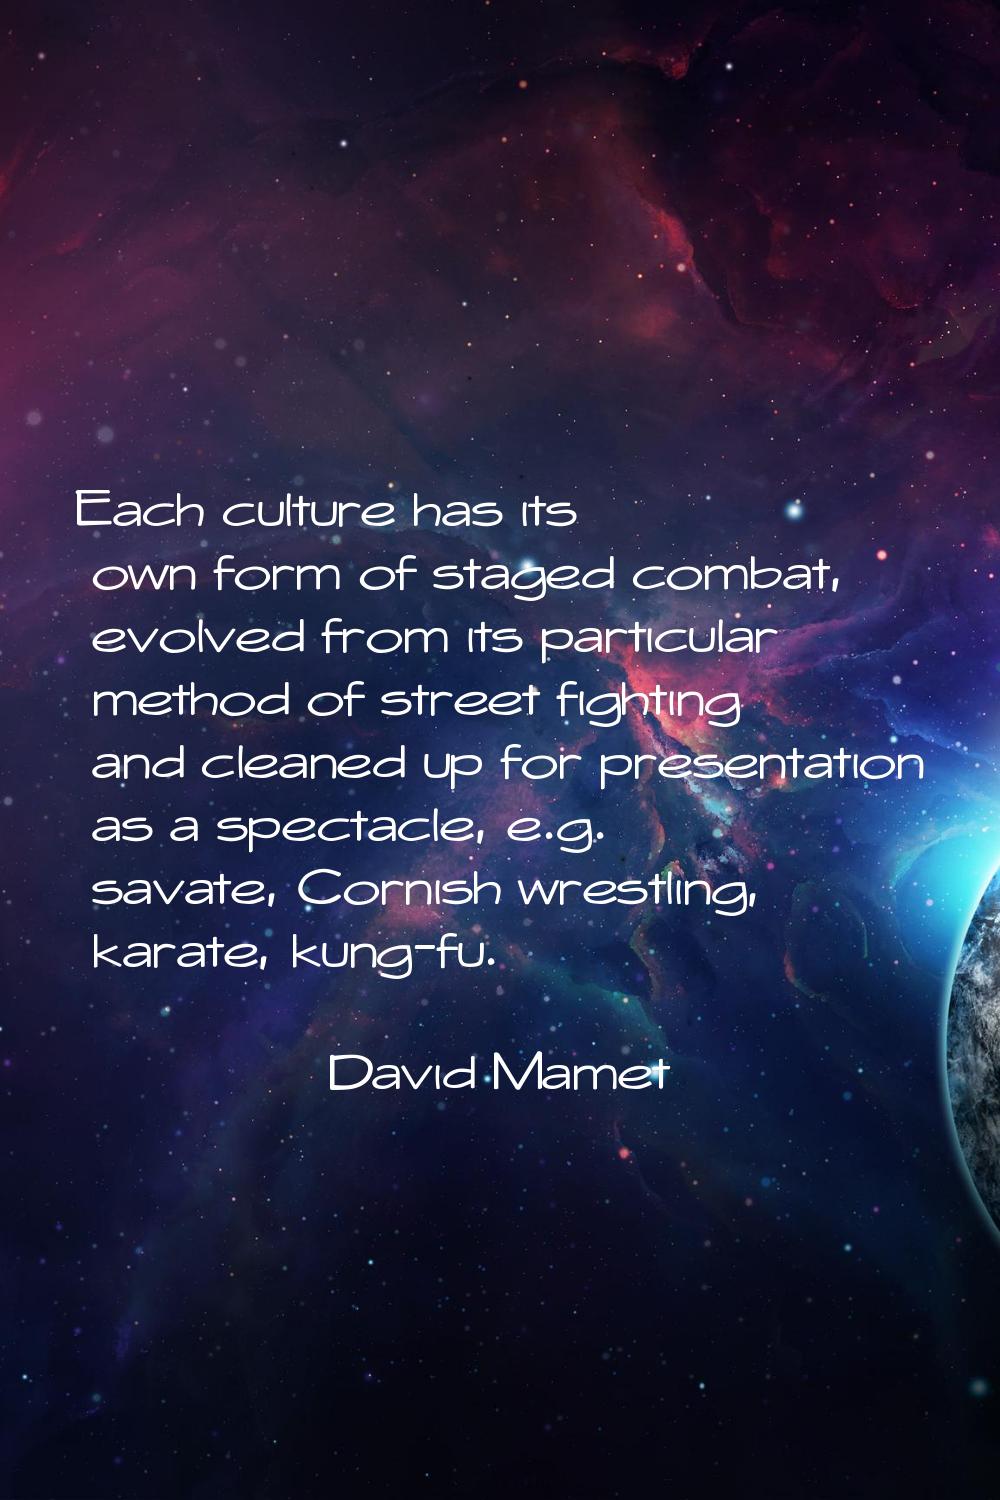 Each culture has its own form of staged combat, evolved from its particular method of street fighti